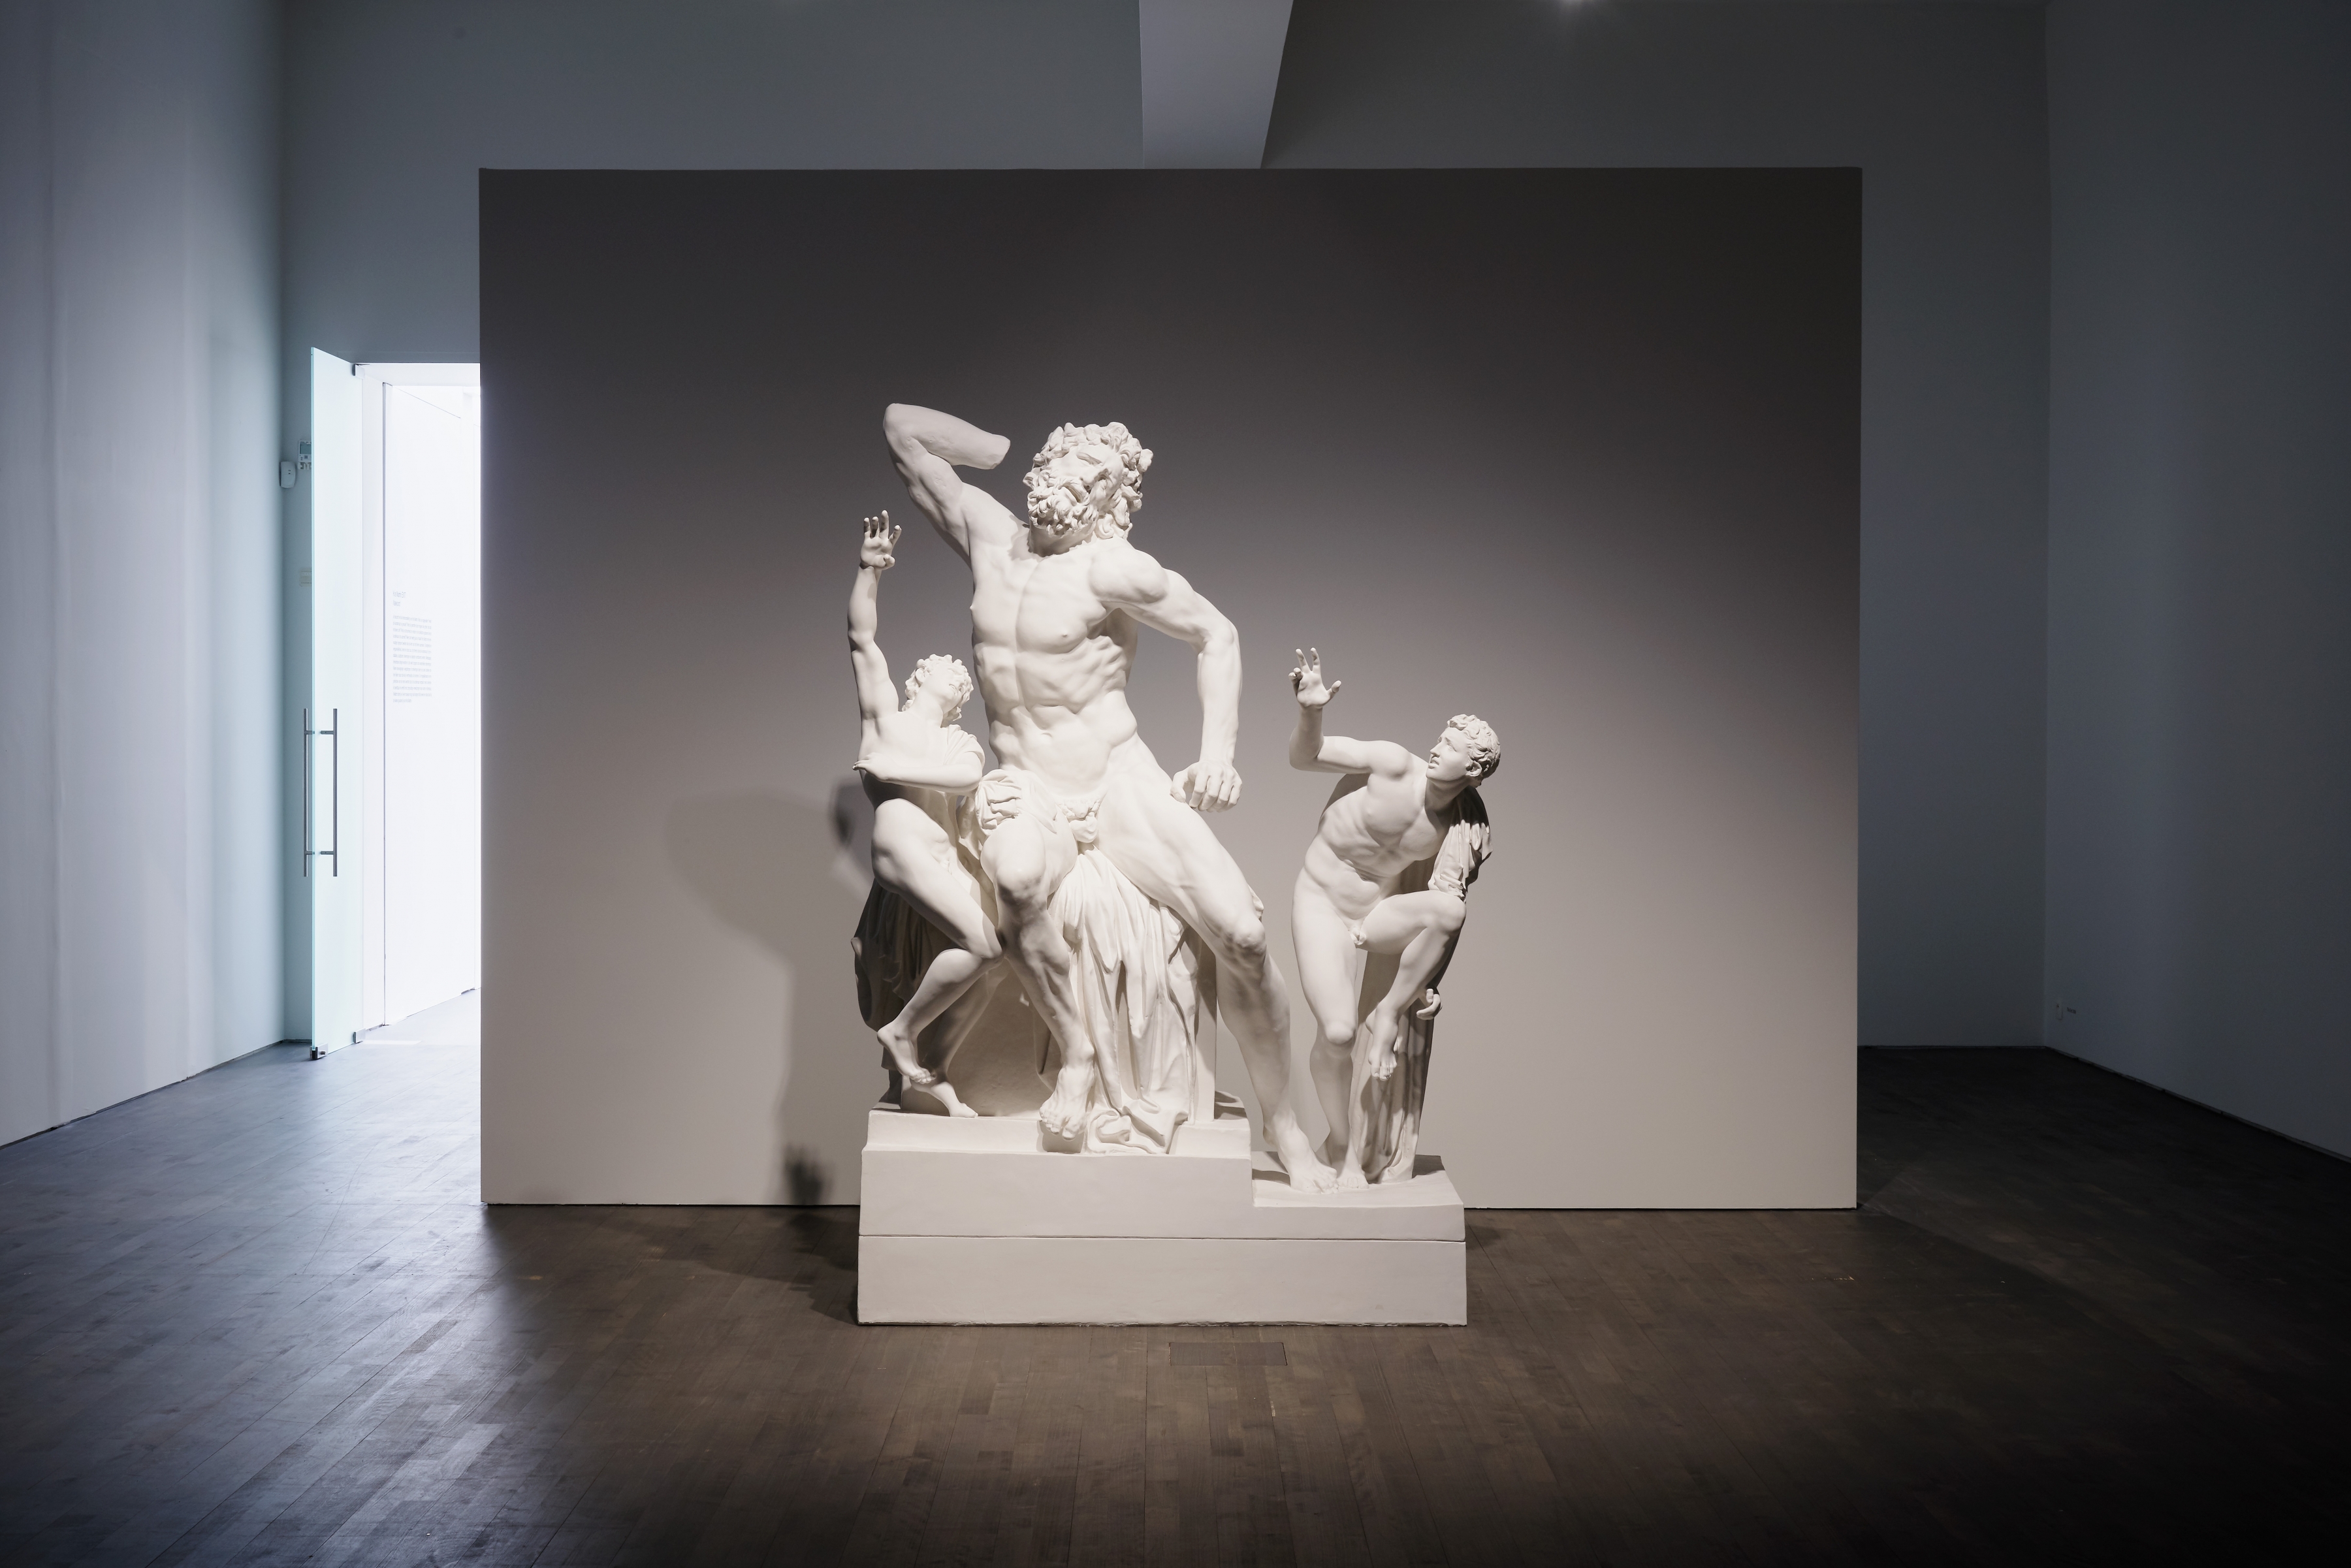 Mandi VIII, 2006

plaster

&nbsp;

&nbsp;

Without the two snakes, Laoco&ouml;n&rsquo;s fear and that of his sons is inexplicable. The cause of their terror has disappeared but the emotion can still be read in their faces and body language.

&nbsp;